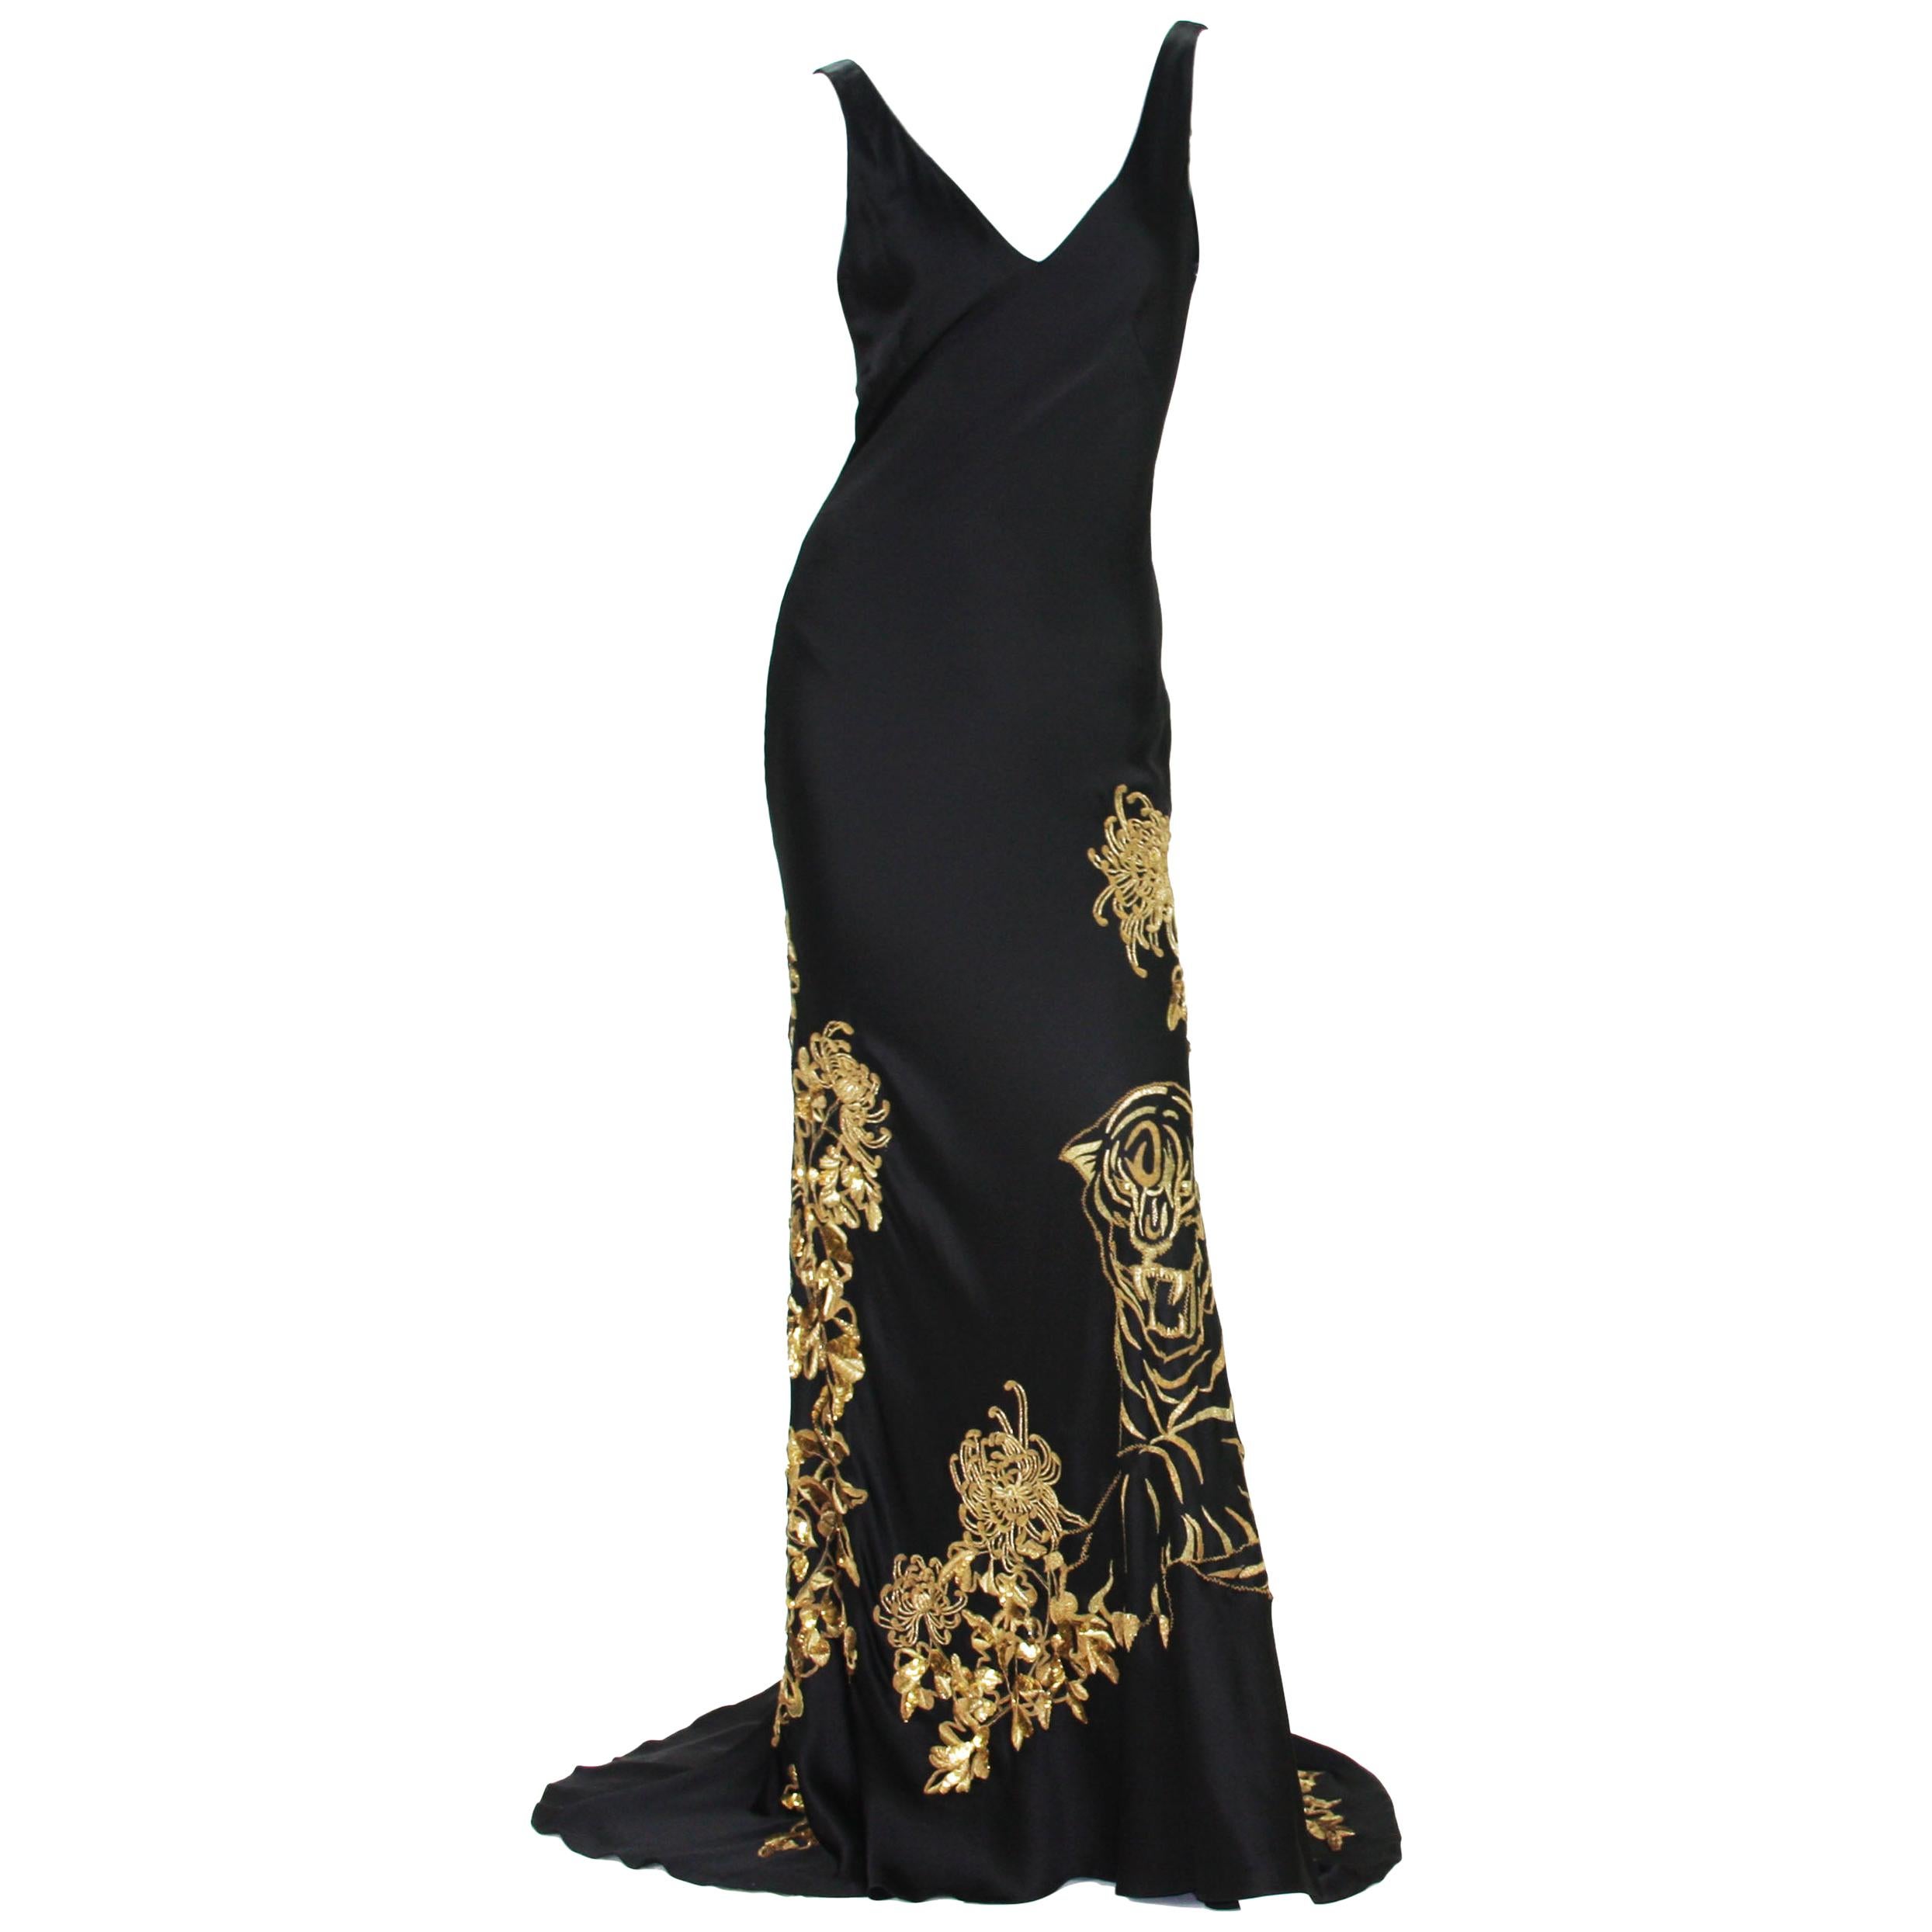 Alexander McQueen 2007 Gold Embroidered Tiger Dress 42 as seen on MARY STUART TV For Sale